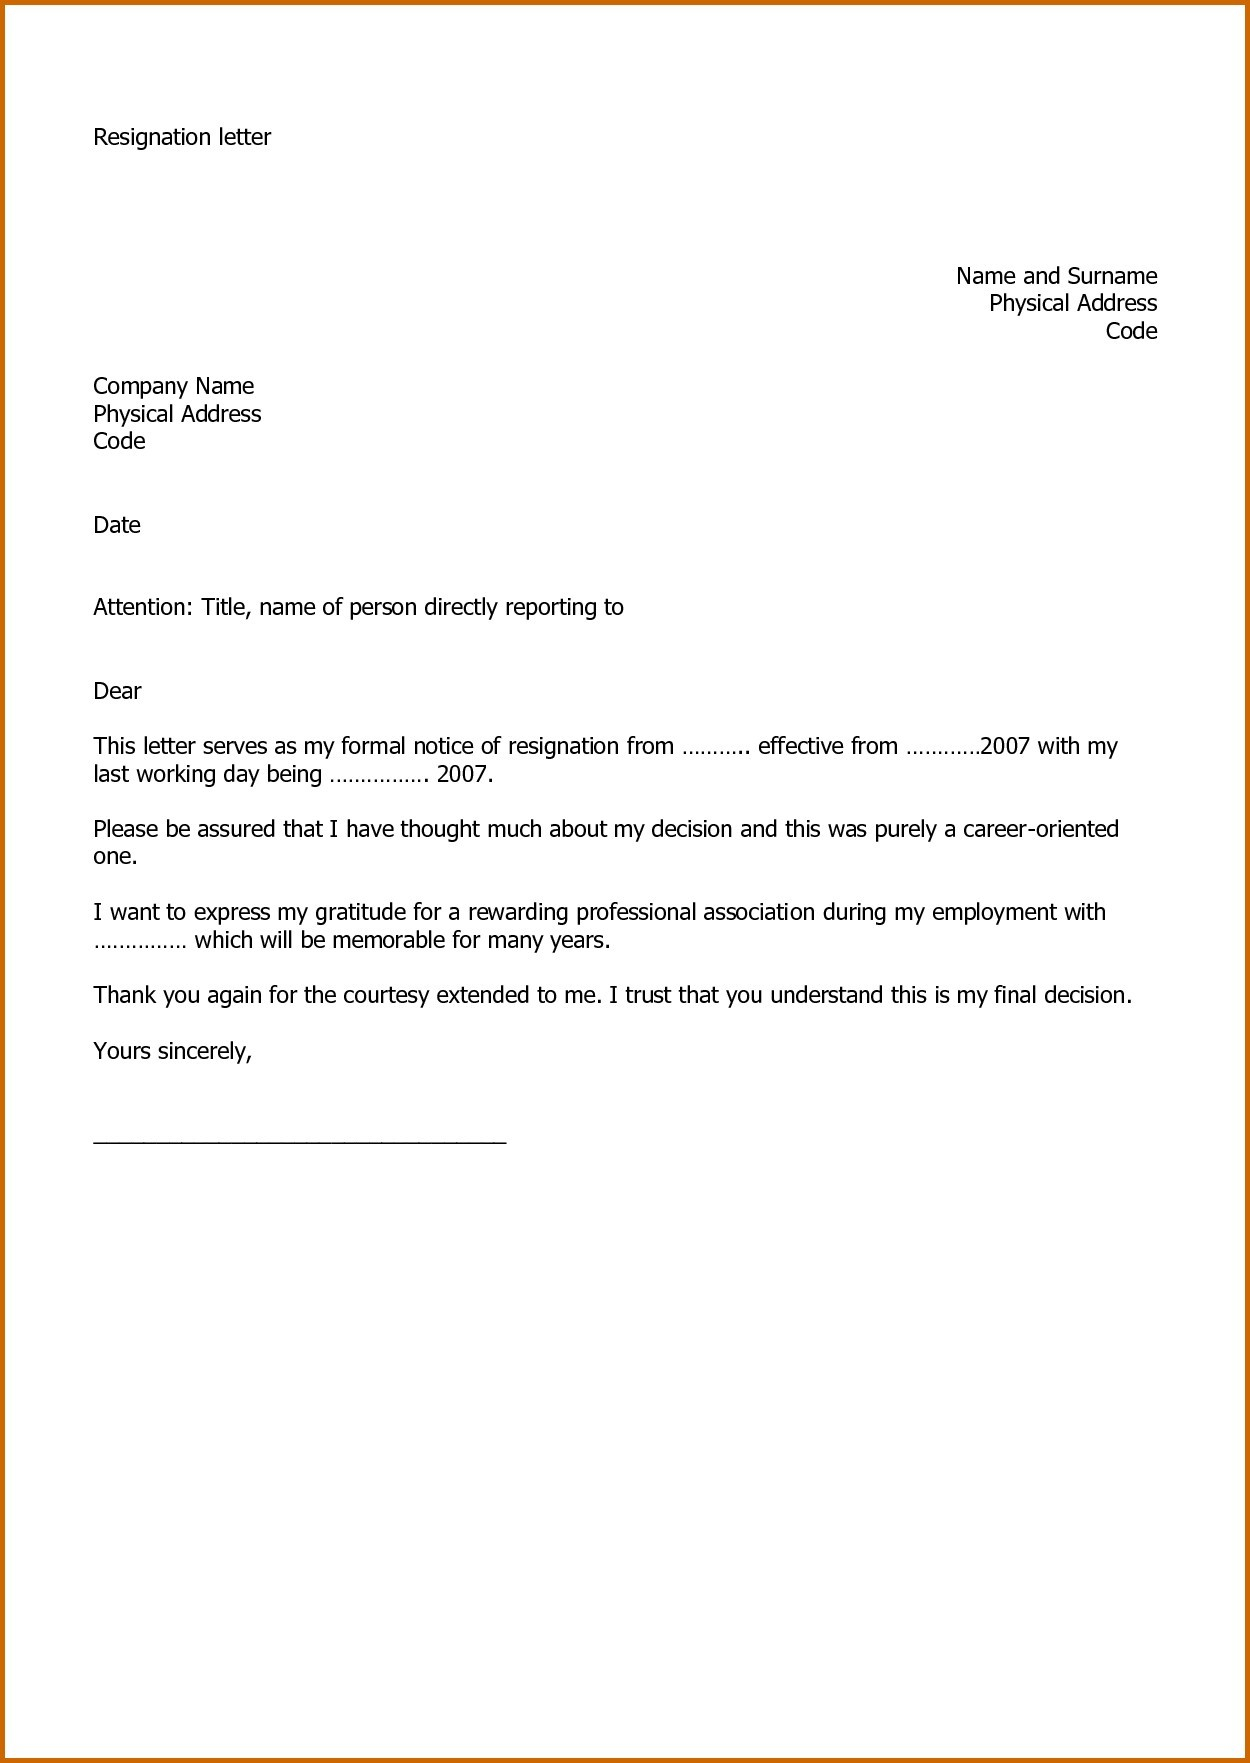 Professional Resignation Letter Template - Thank You Letter after Finishing A Job Save Resignation Letter for